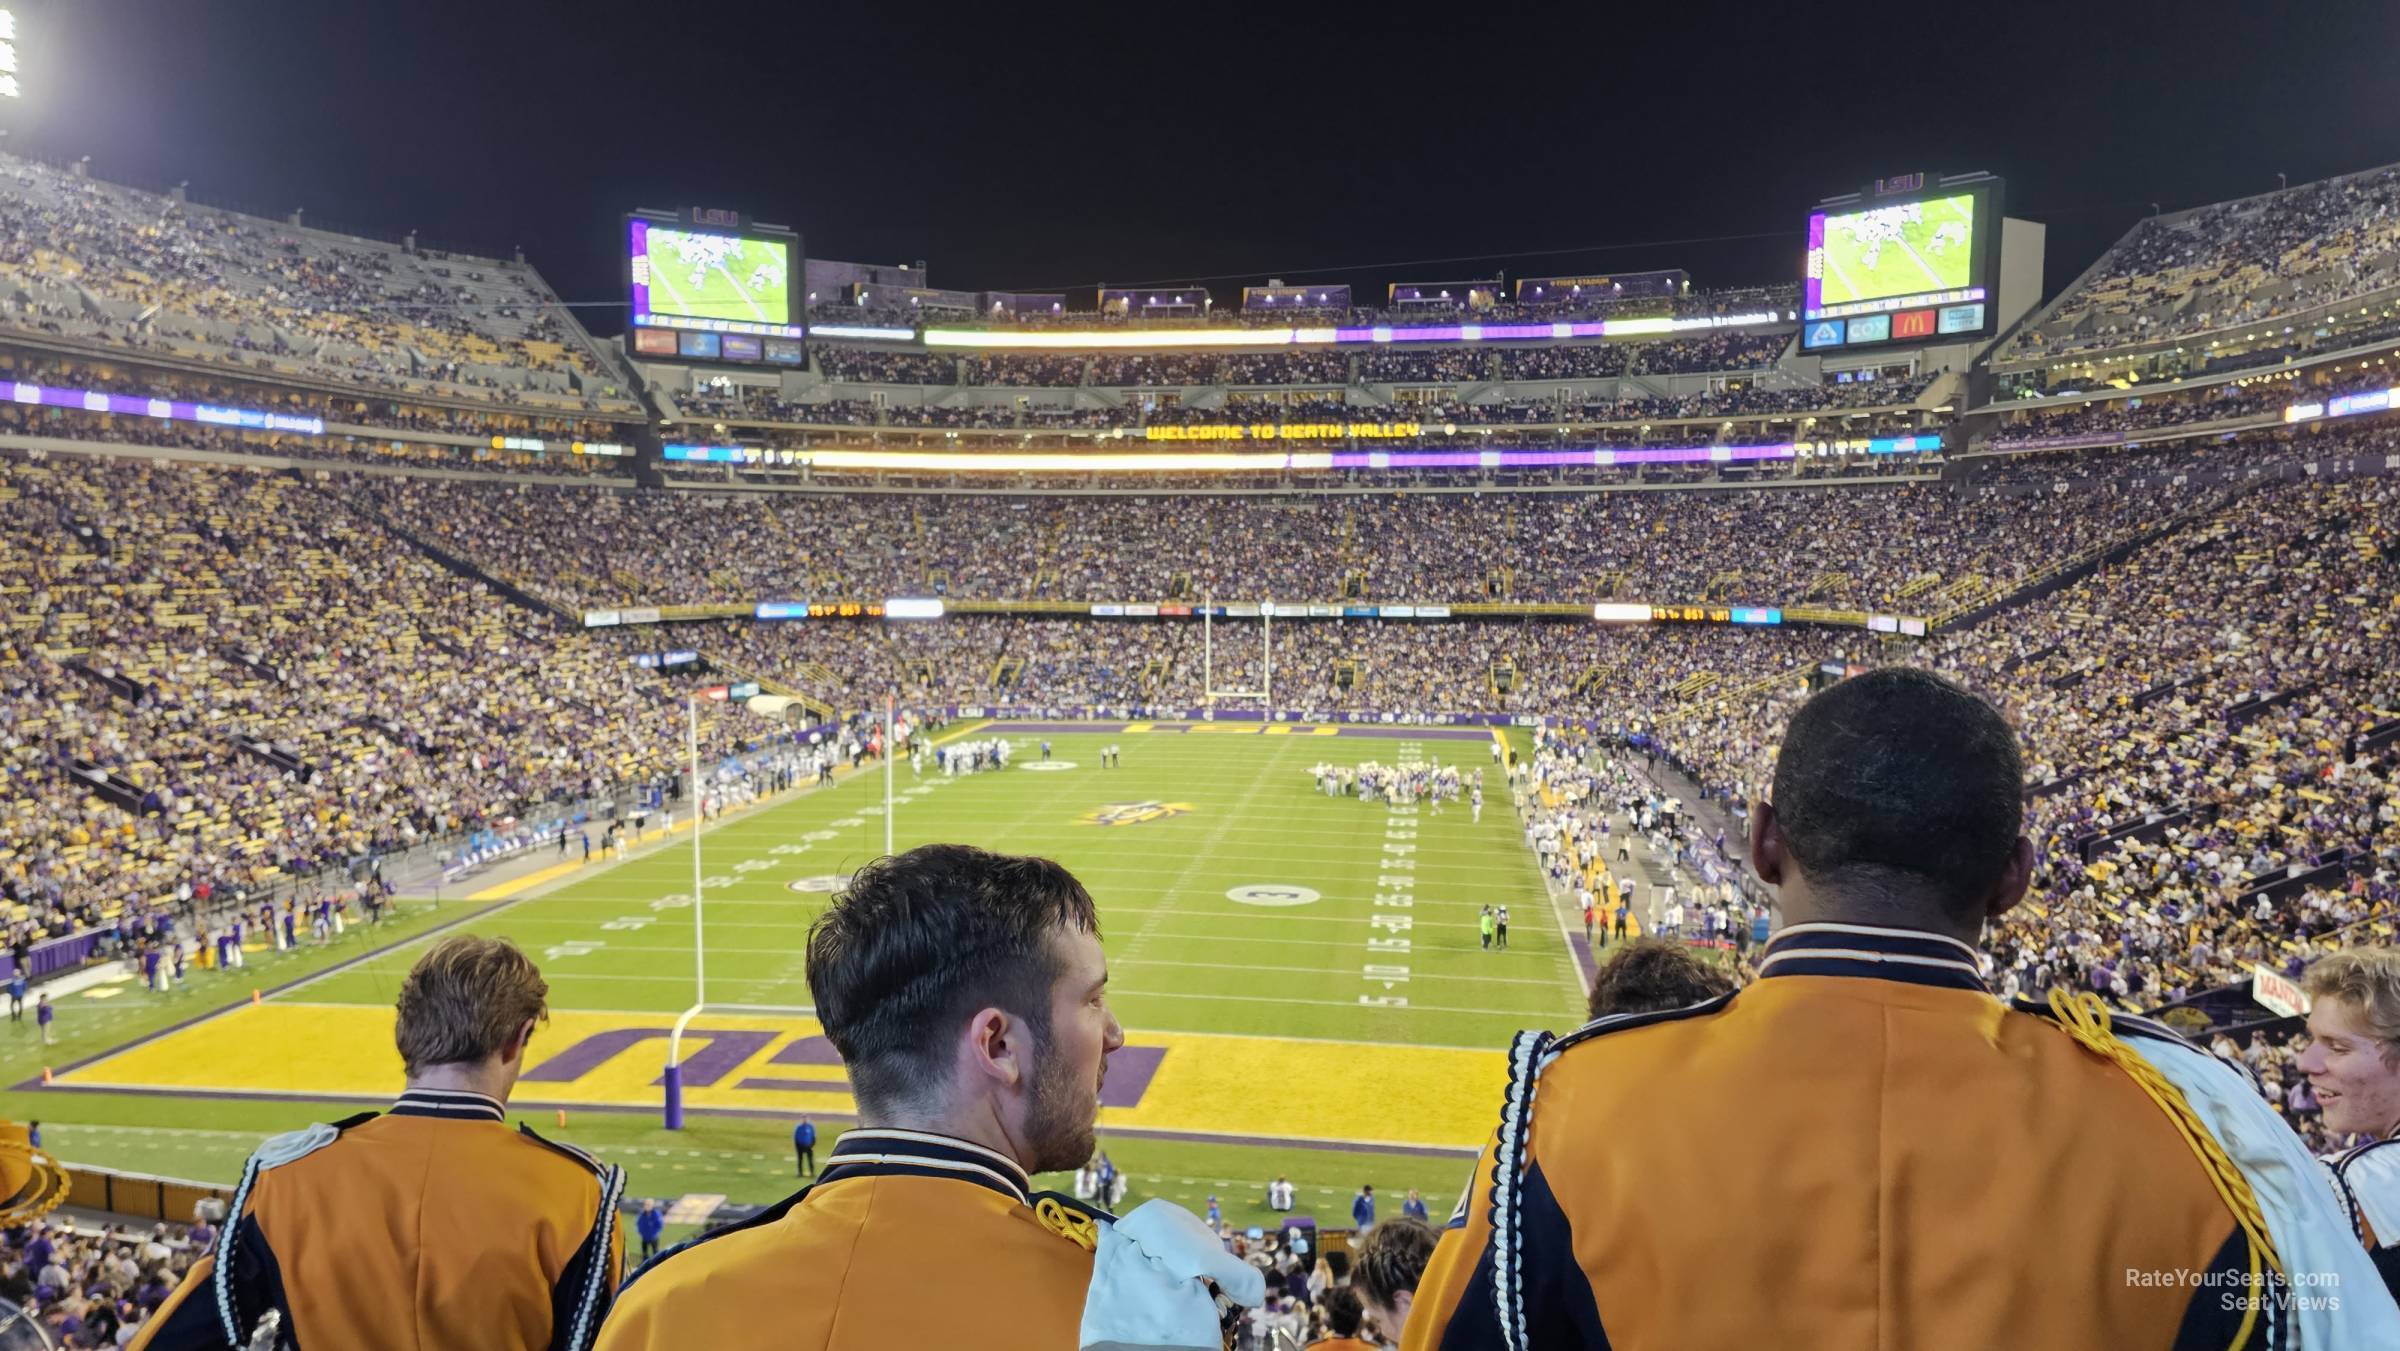 section 231, row 1 seat view  - tiger stadium